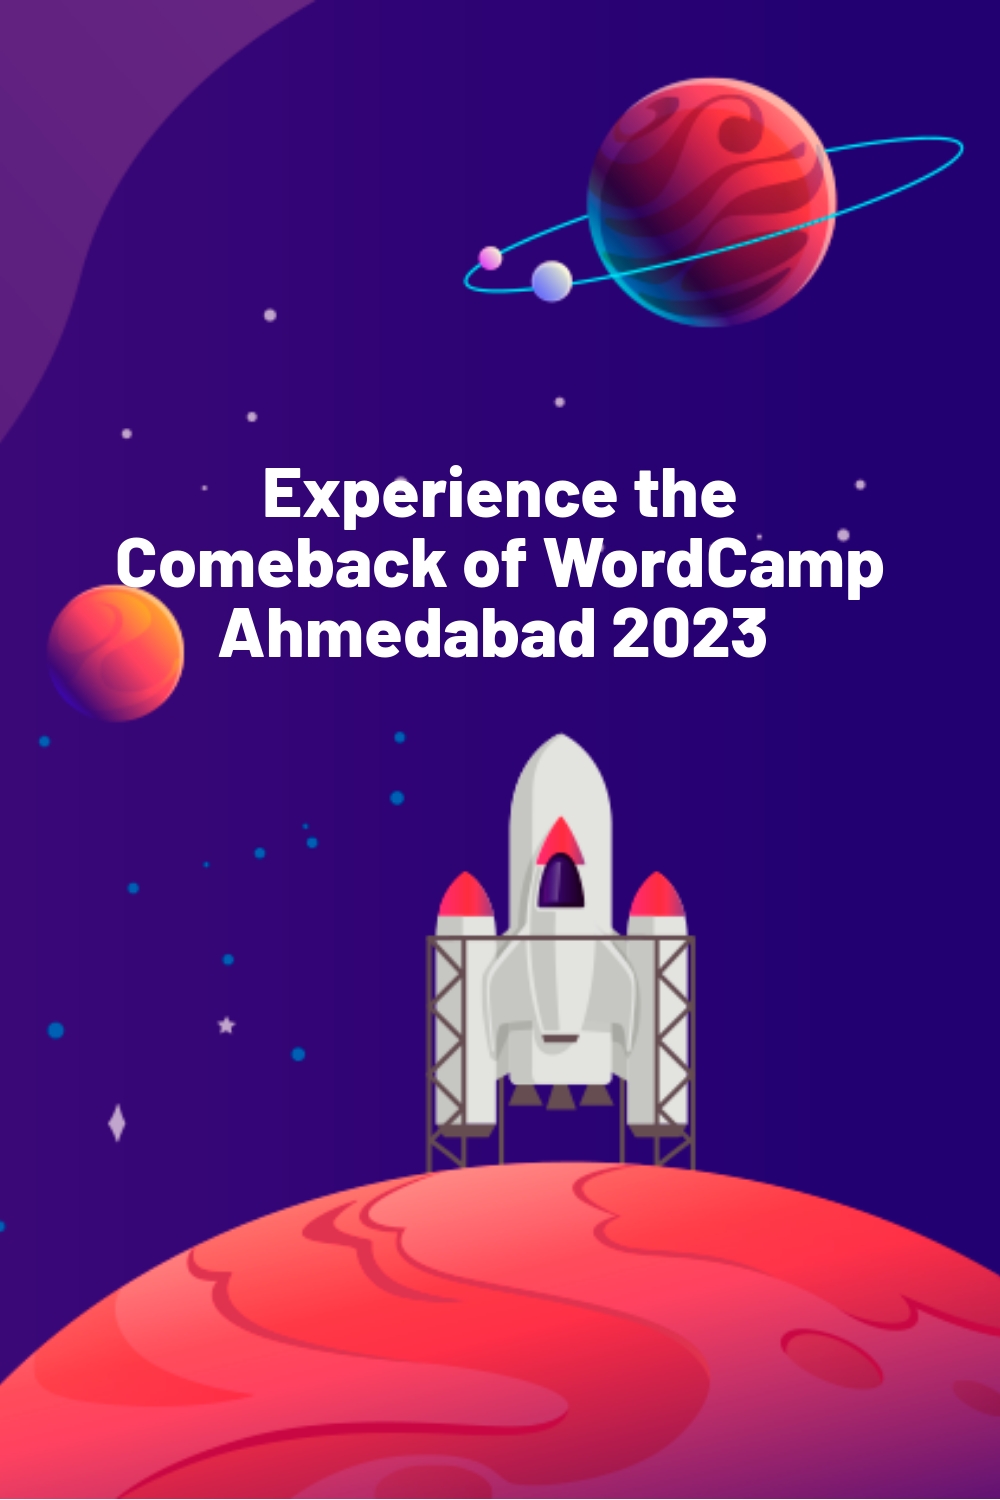 Experience the Comeback of WordCamp Ahmedabad 2023 